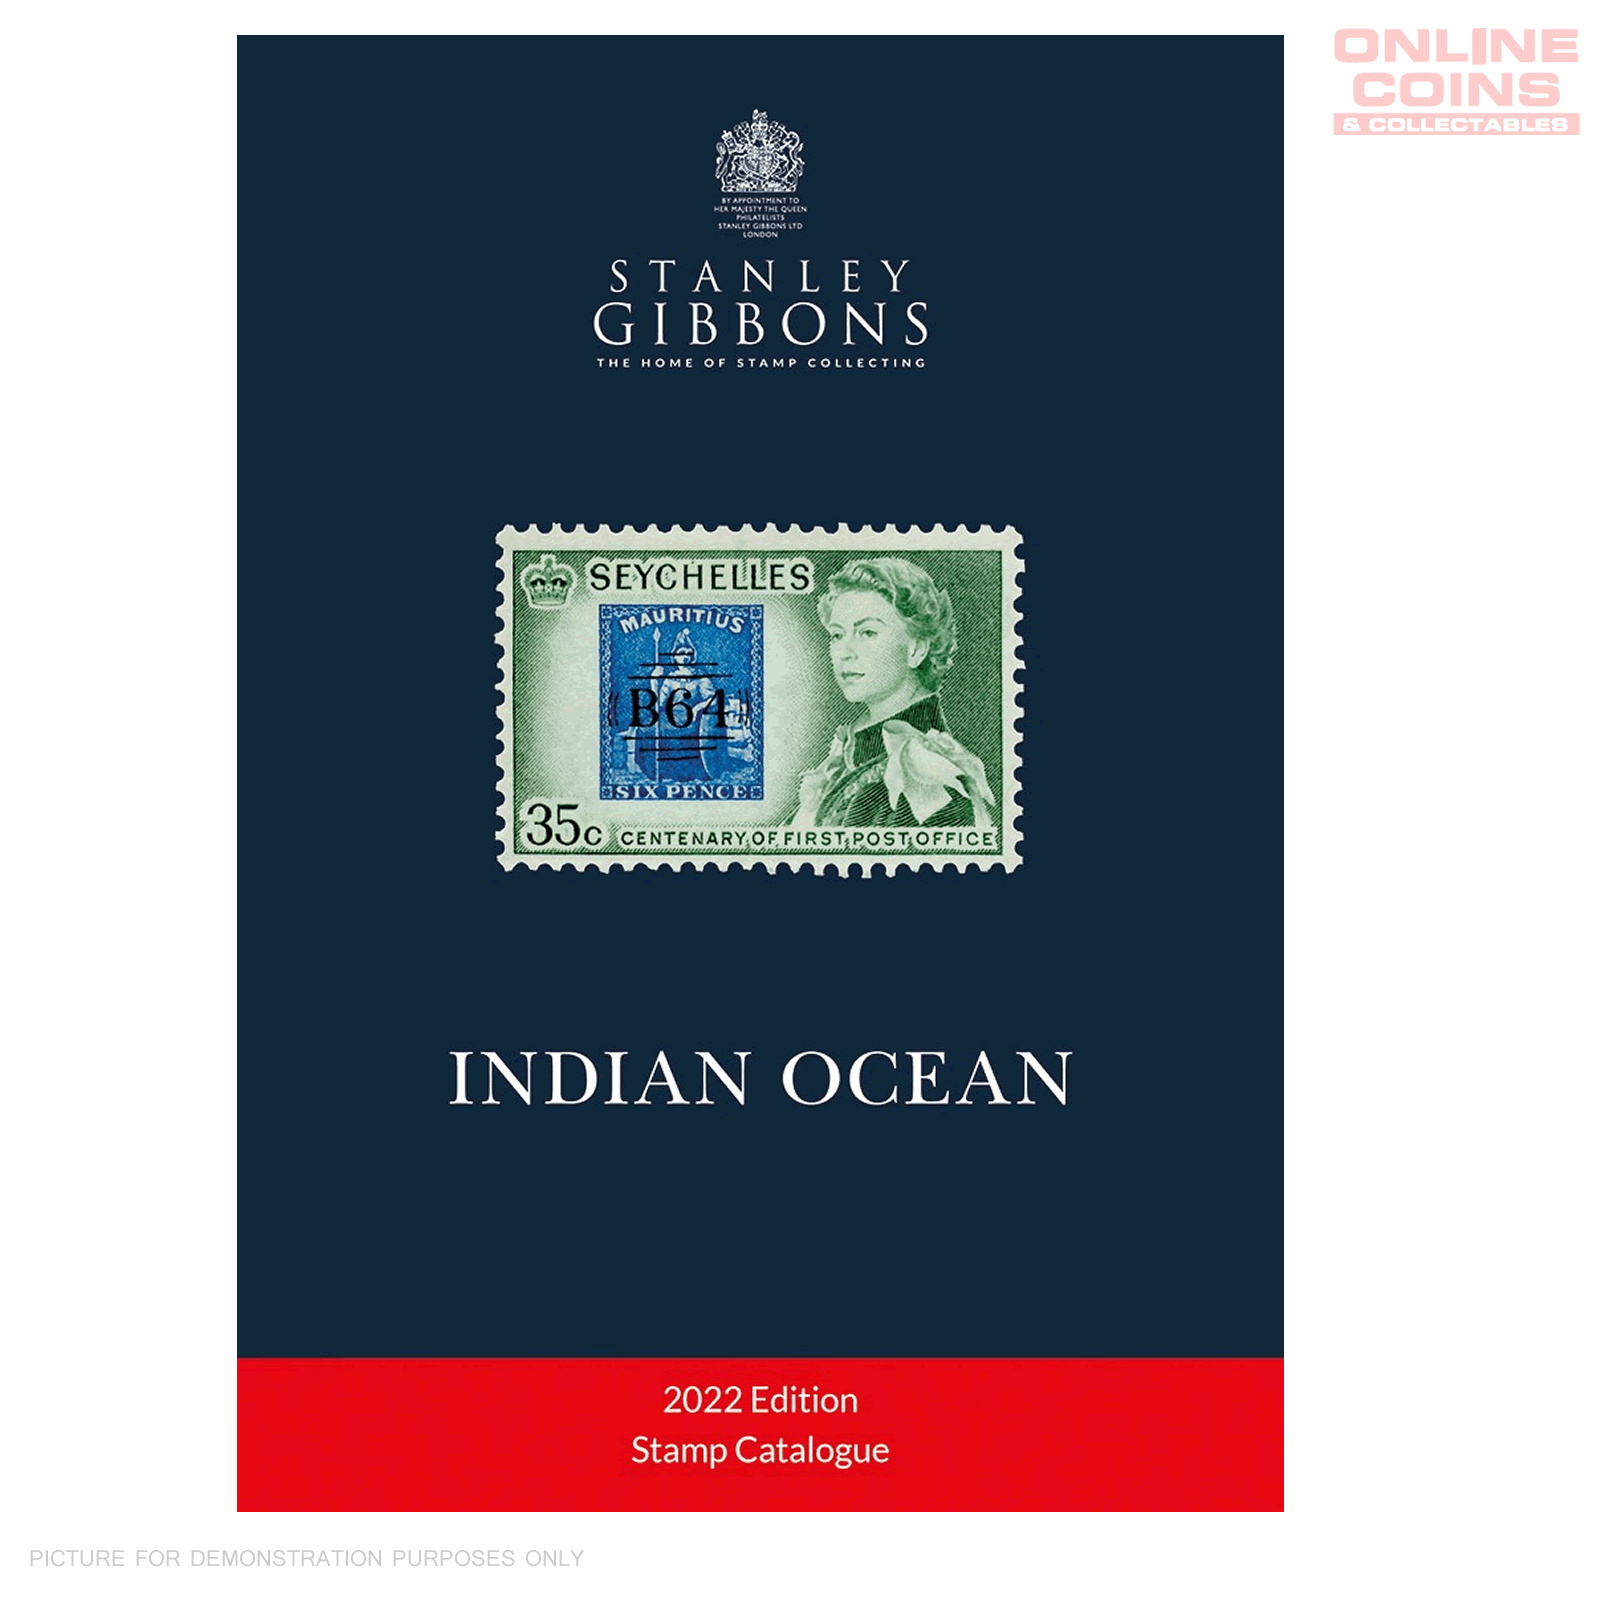 Stanley Gibbons 2022 Indian Ocean Stamp Catalogue 4th Edition